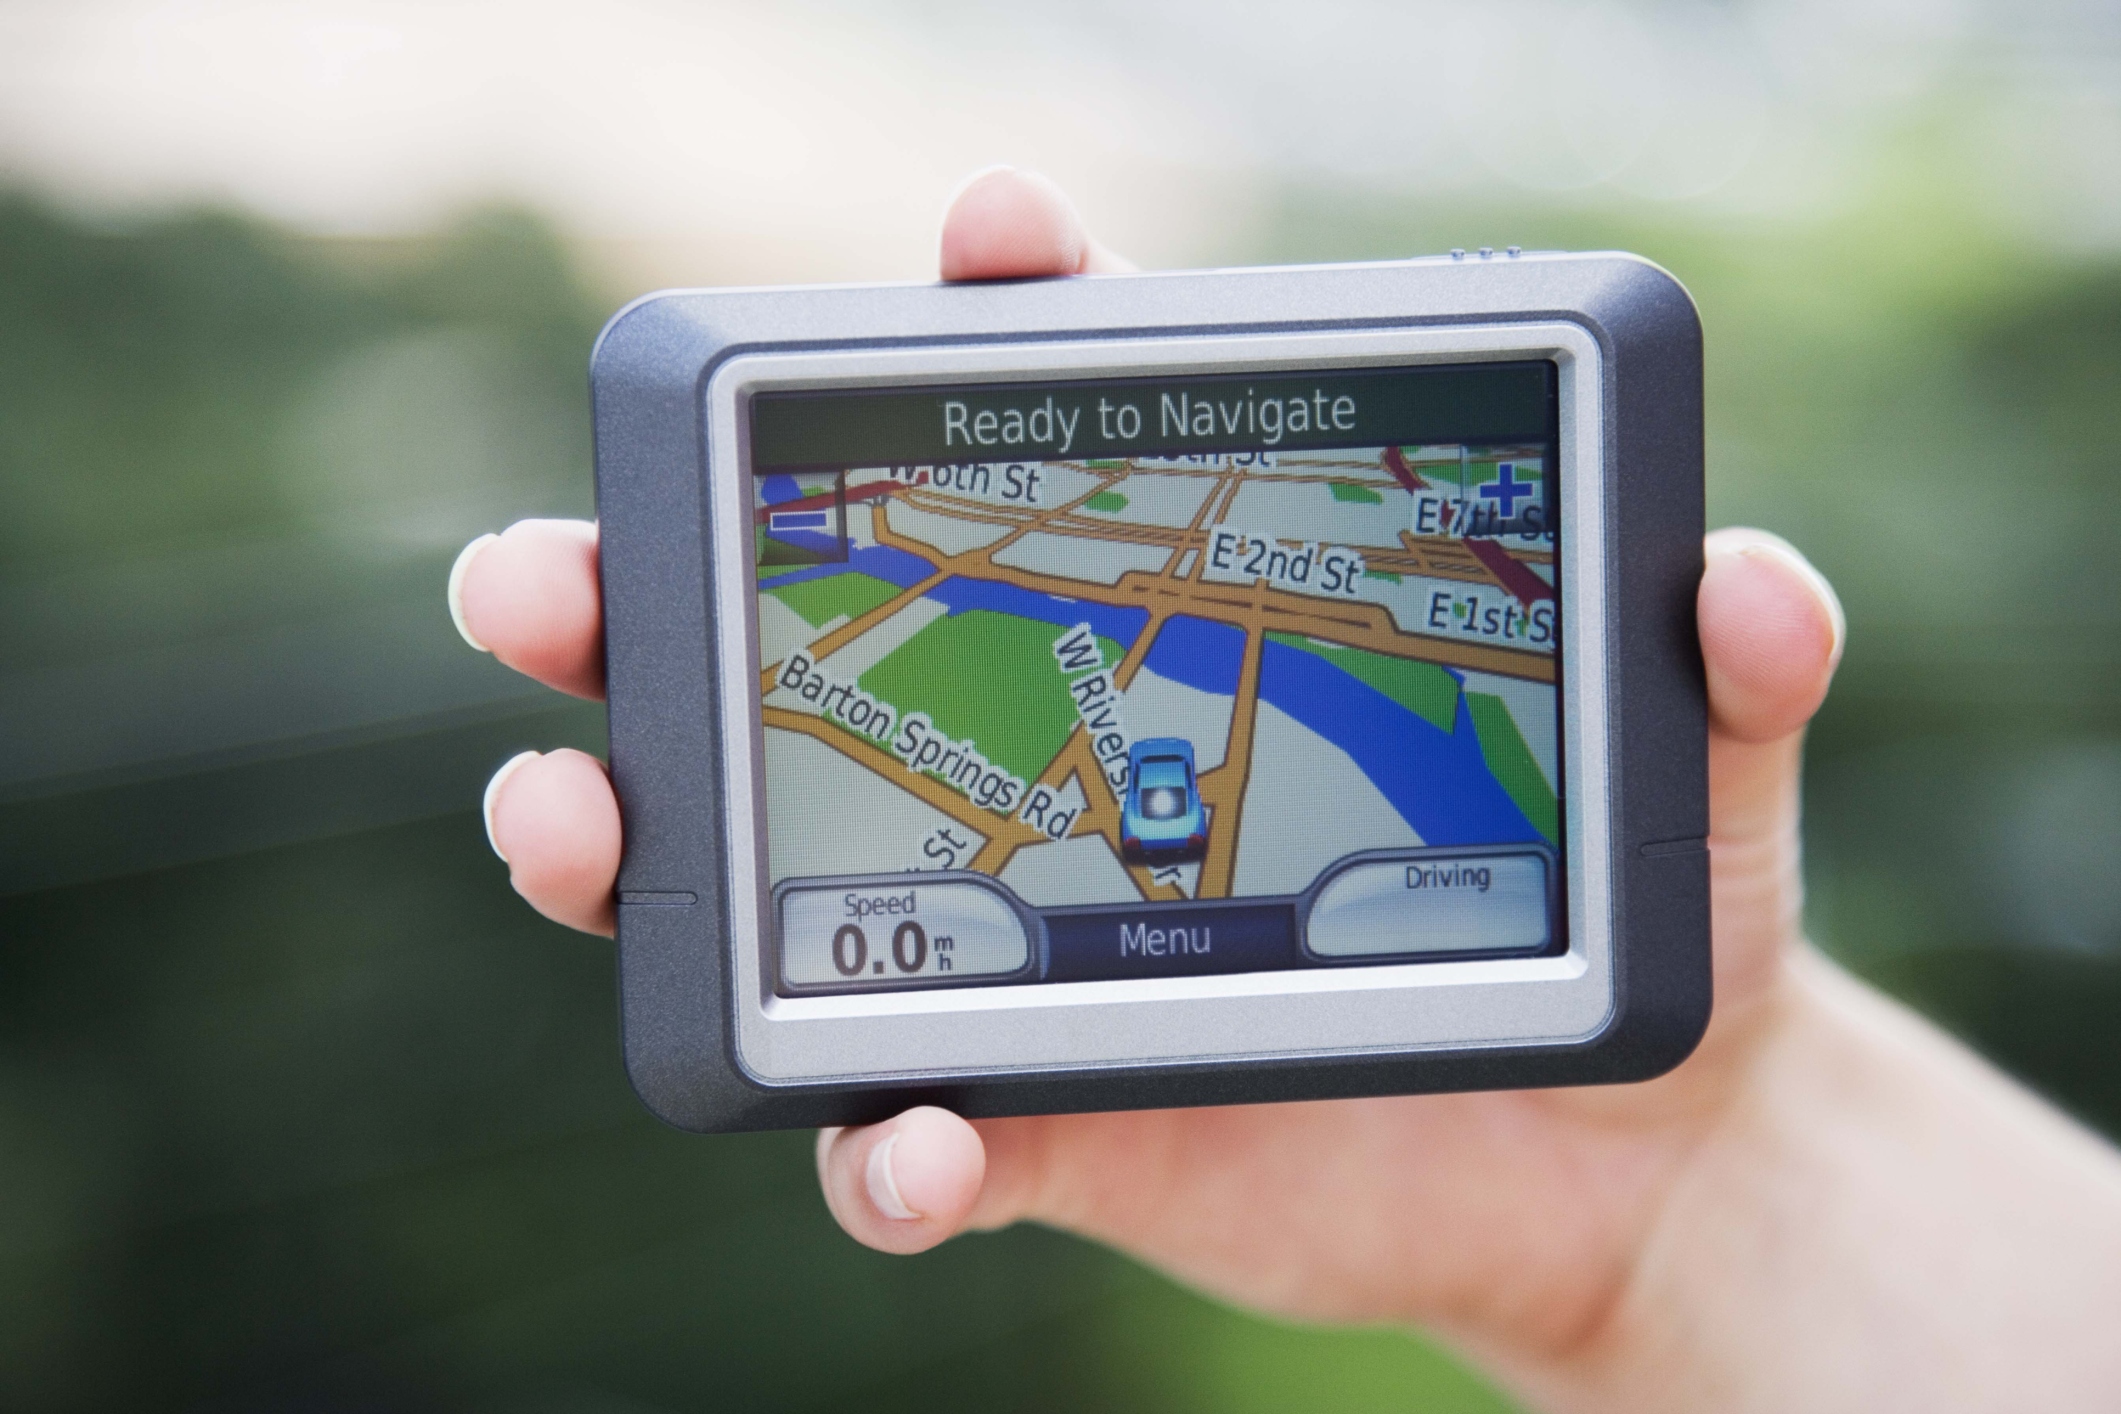 stilhed loyalitet Watchful How to Troubleshoot a Garmin Nuvi With No Sound | Techwalla